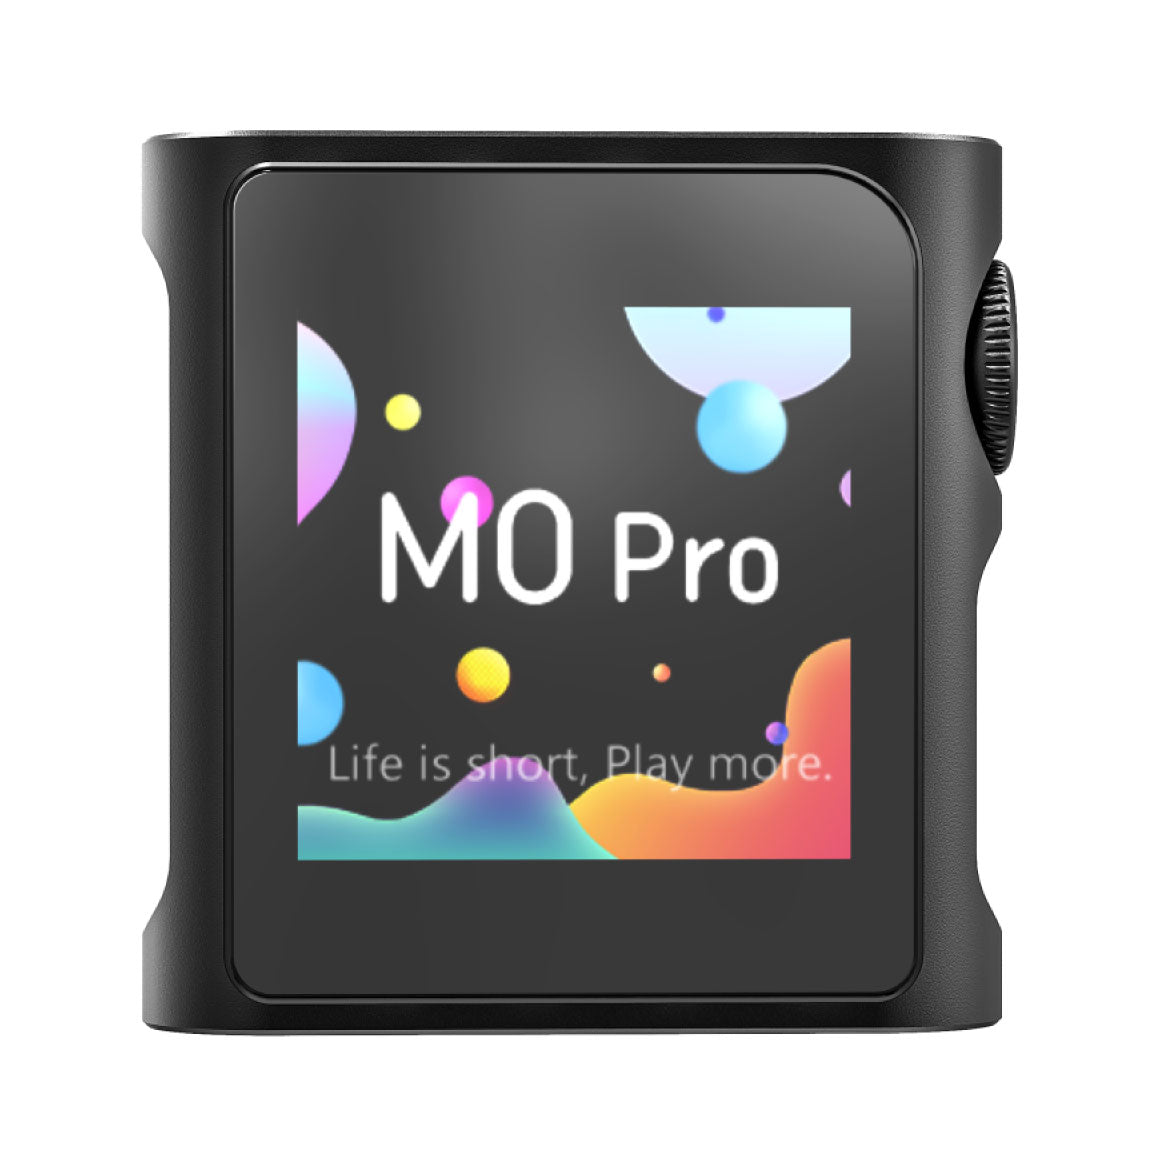 Shanling M0 Pro Ultra-Portable Music Player